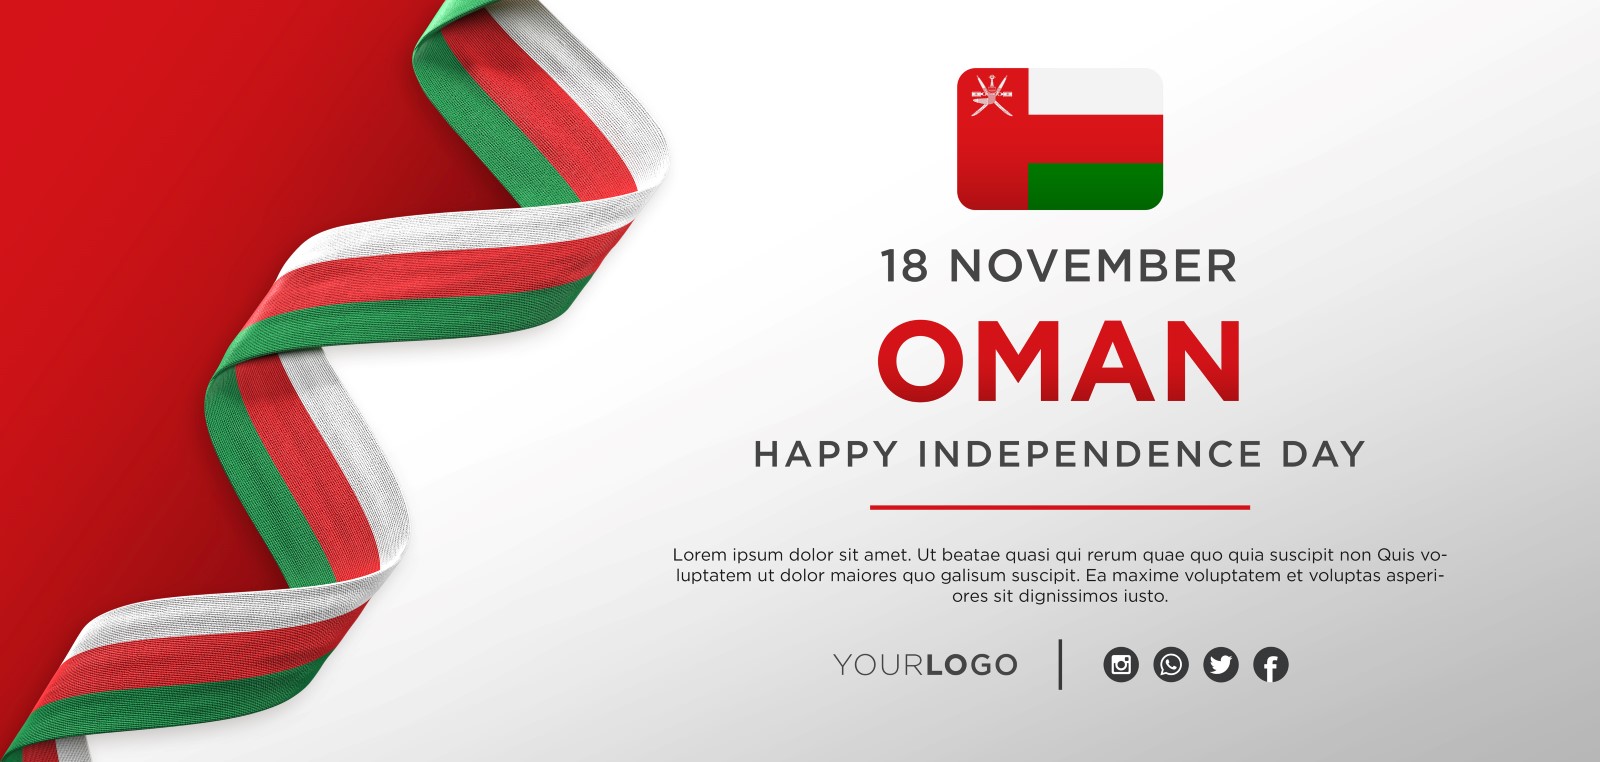 Oman National Independence Day Celebration Banner, National Anniversary